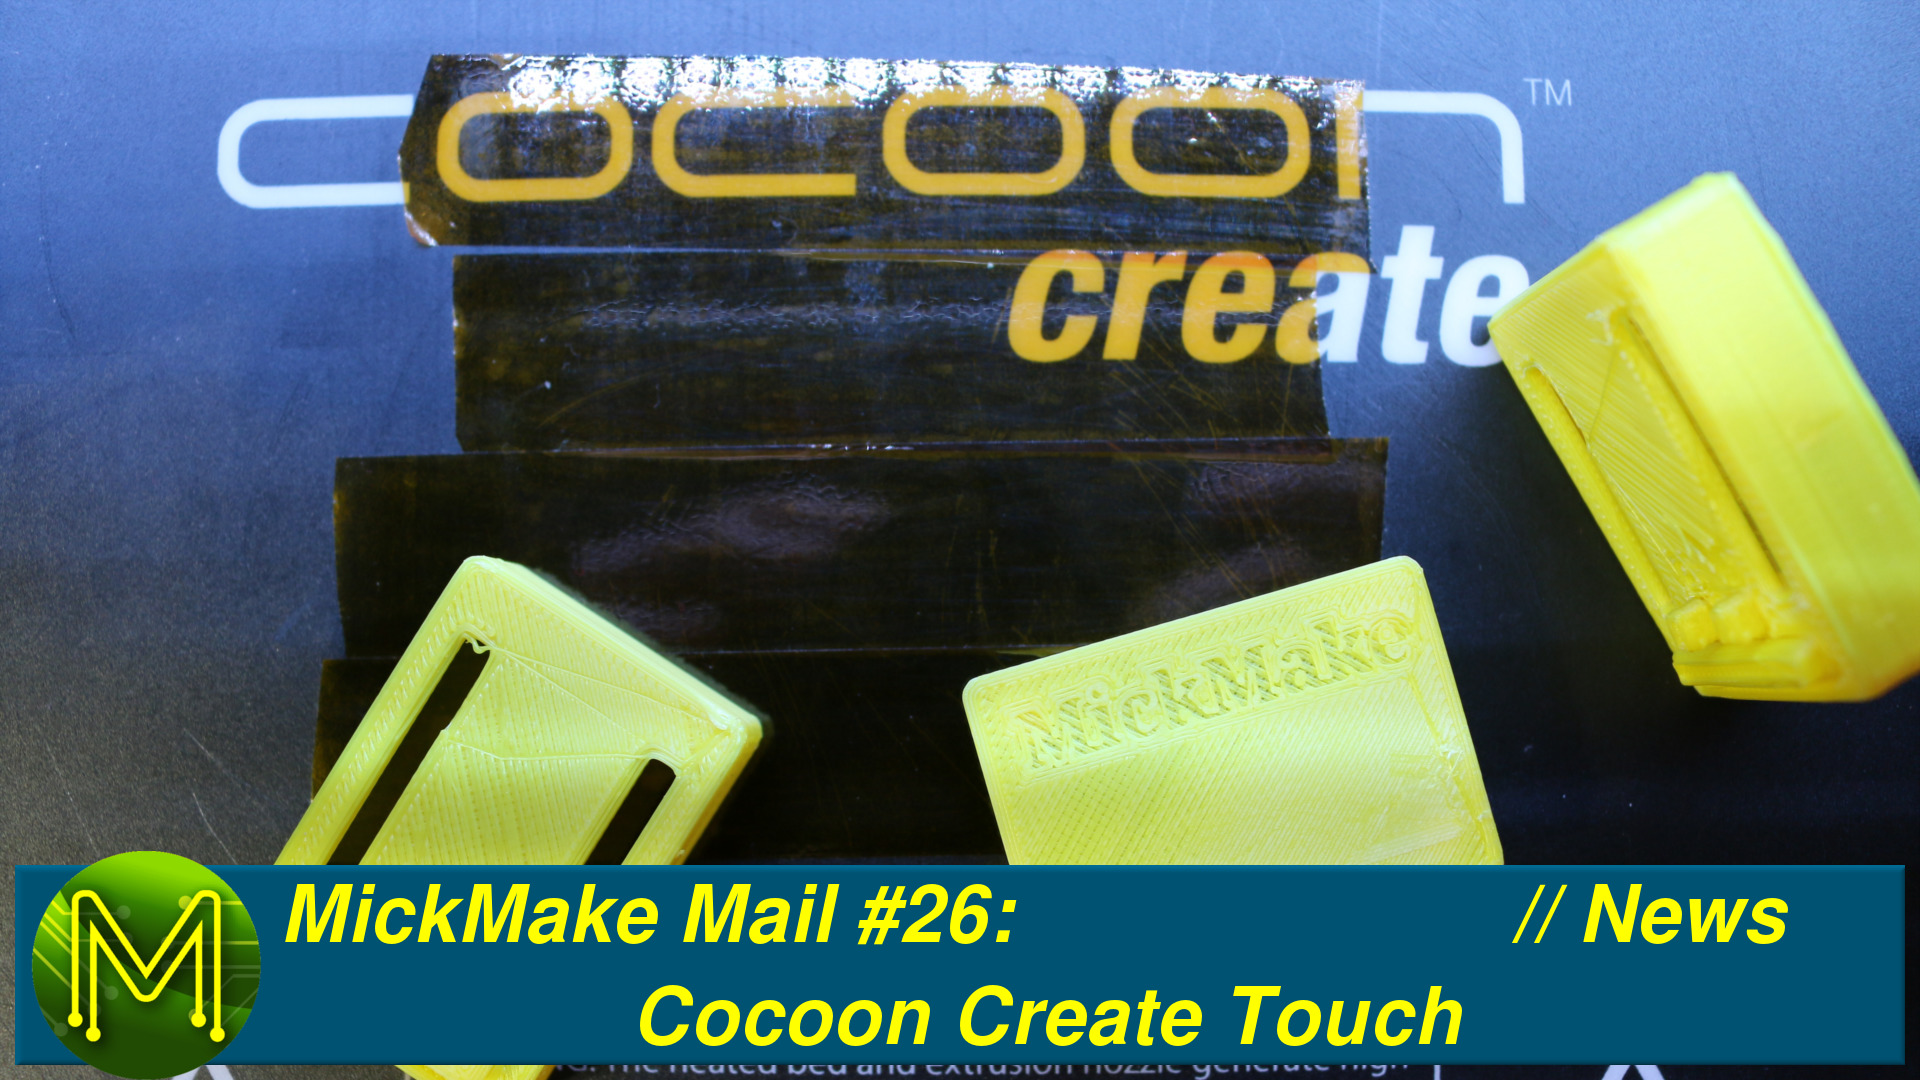 MickMake Mail #26: ALDI 3D Printer - Cocoon Create Touch // News